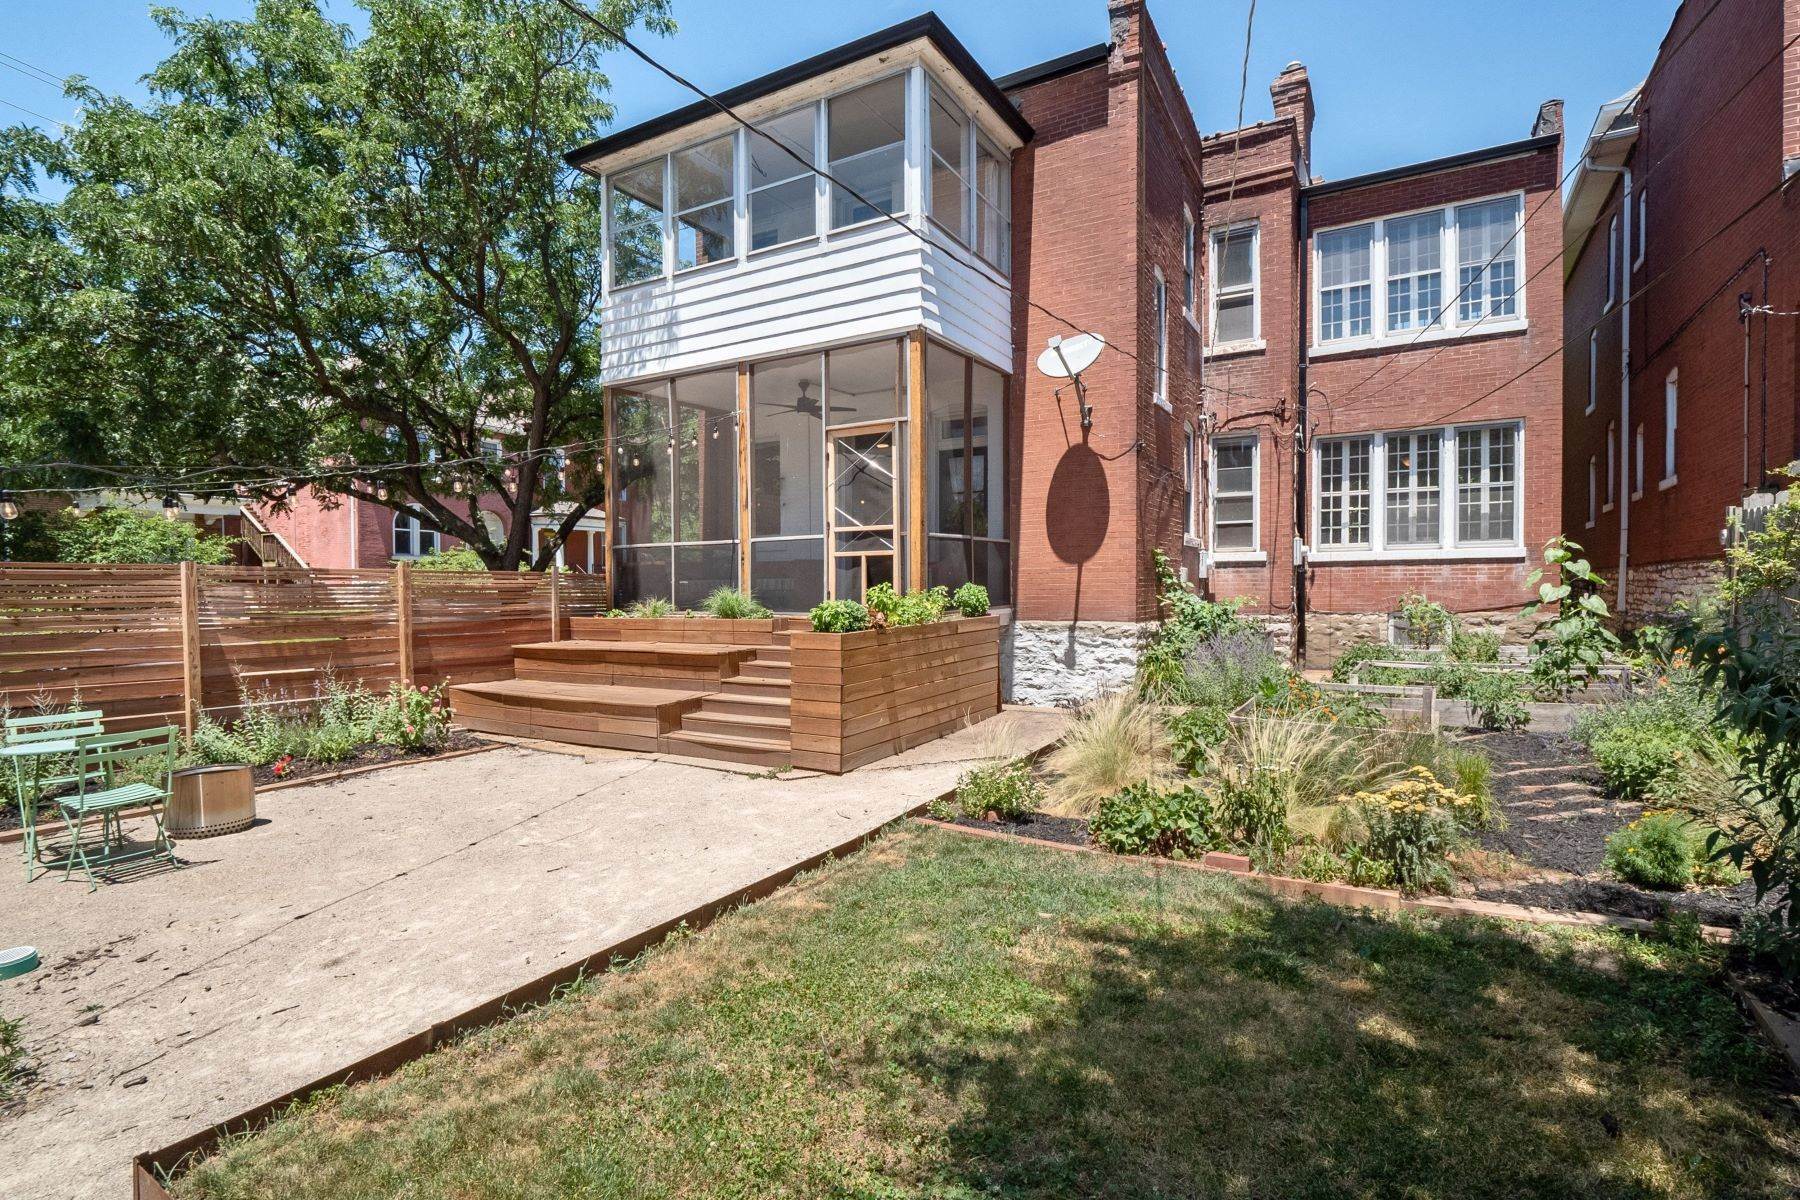 19. Multi-Family Homes for Sale at Perfect Two-Family Home Loaded with Character 3458 Sidney Street St. Louis, Missouri 63104 United States